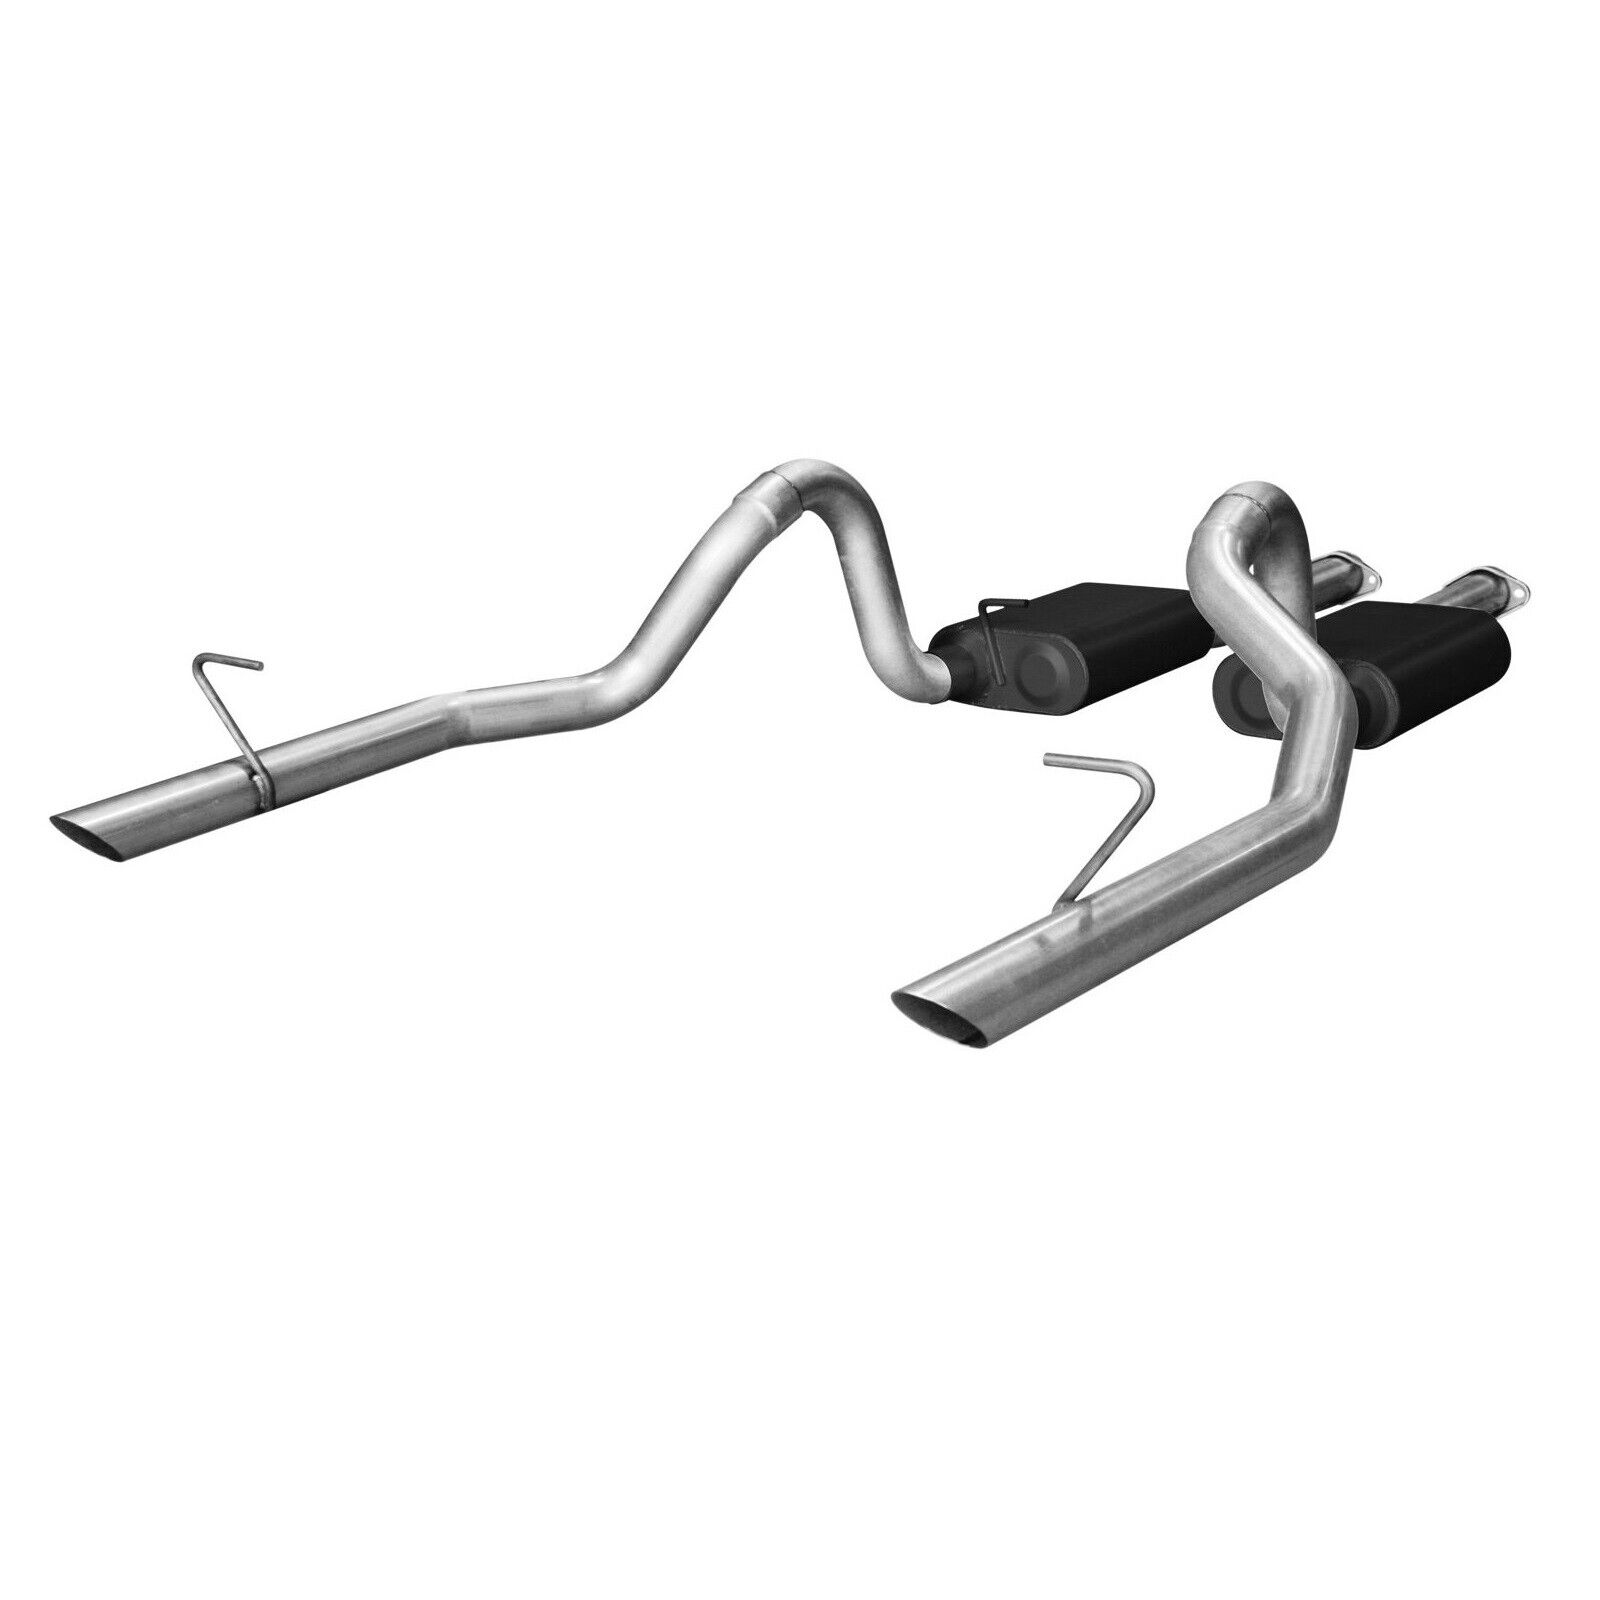 Flowmaster 17113 American Thunder Cat-Back Exhaust Kit for 86 to 93 Ford Mustang